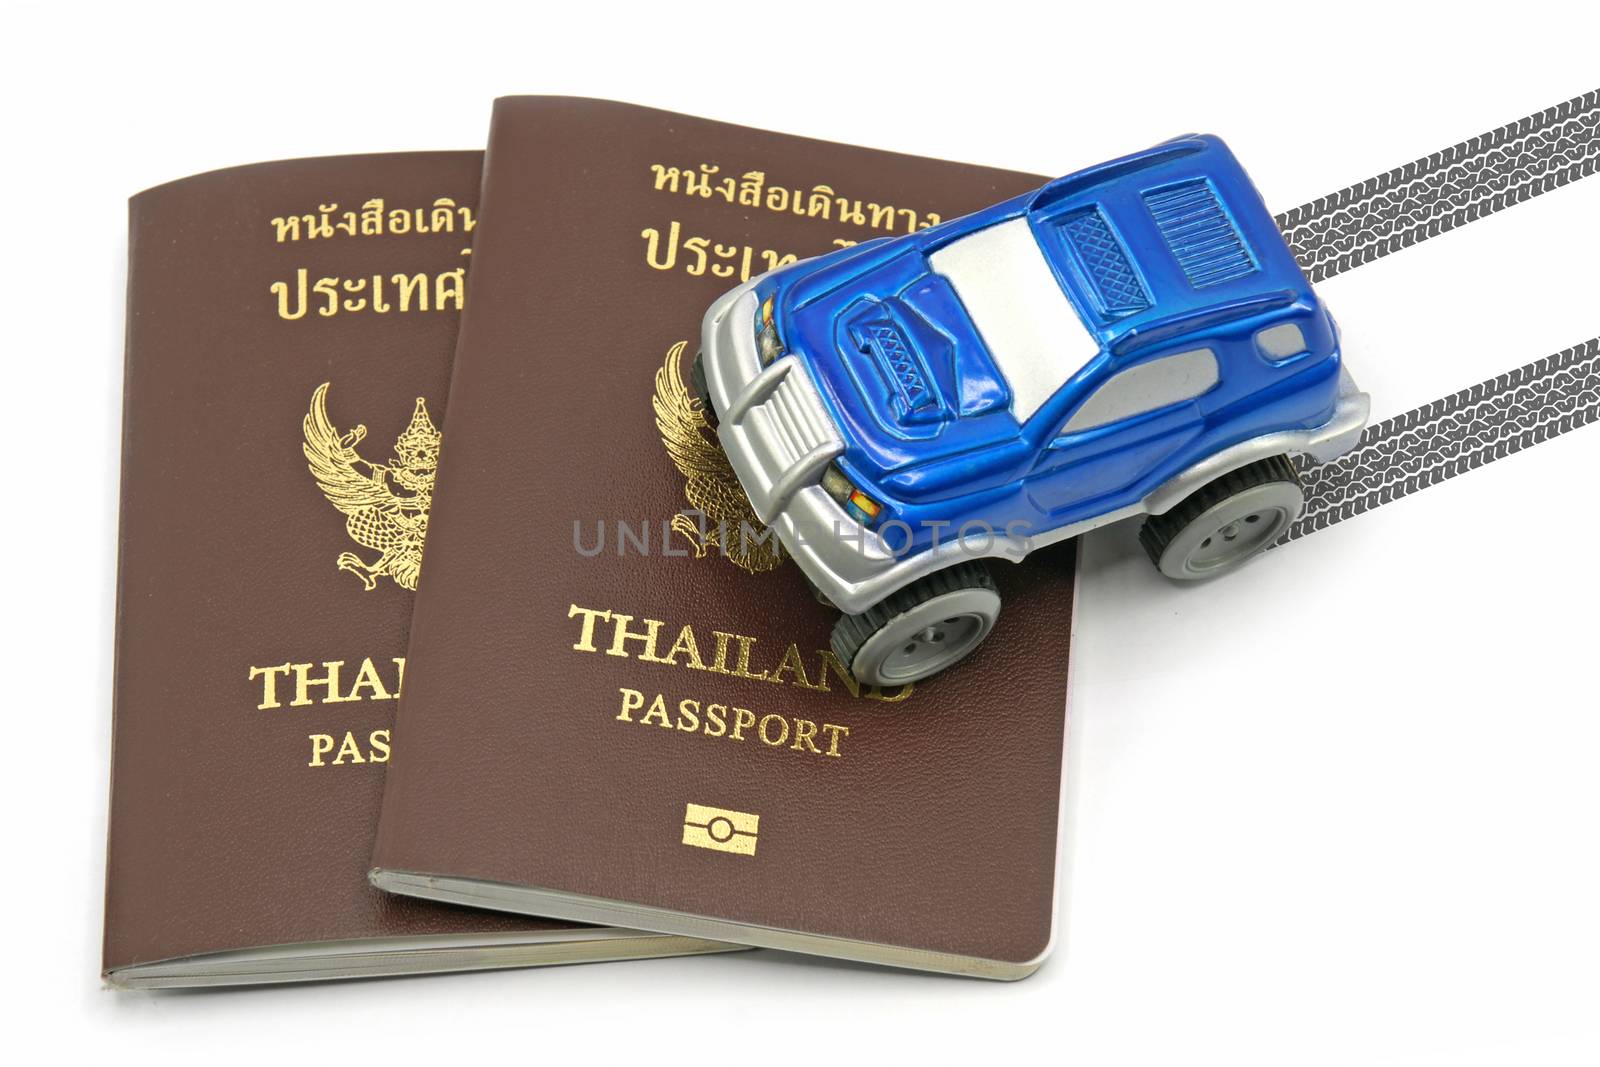 Thailand passport and blue 4wd car for travel concept by mranucha